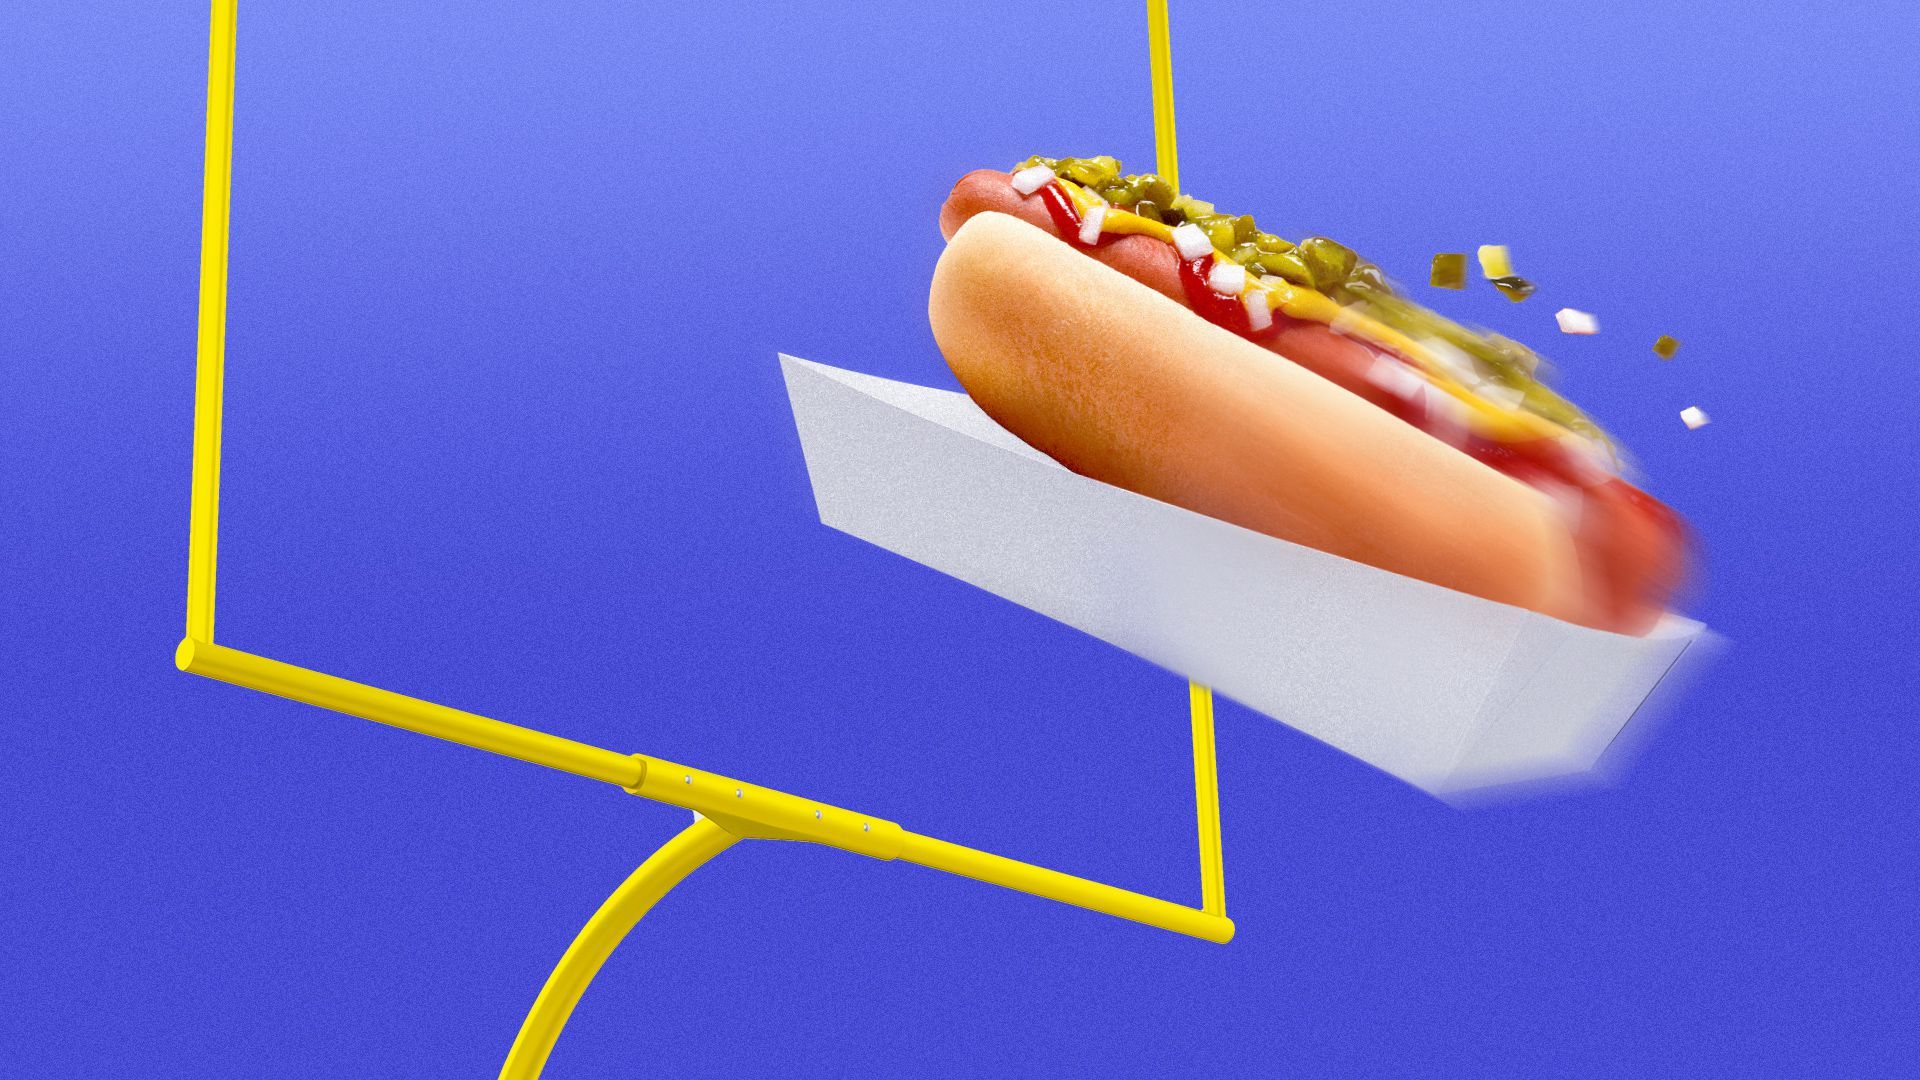 Illustration of a hot dog flying through a goal post.